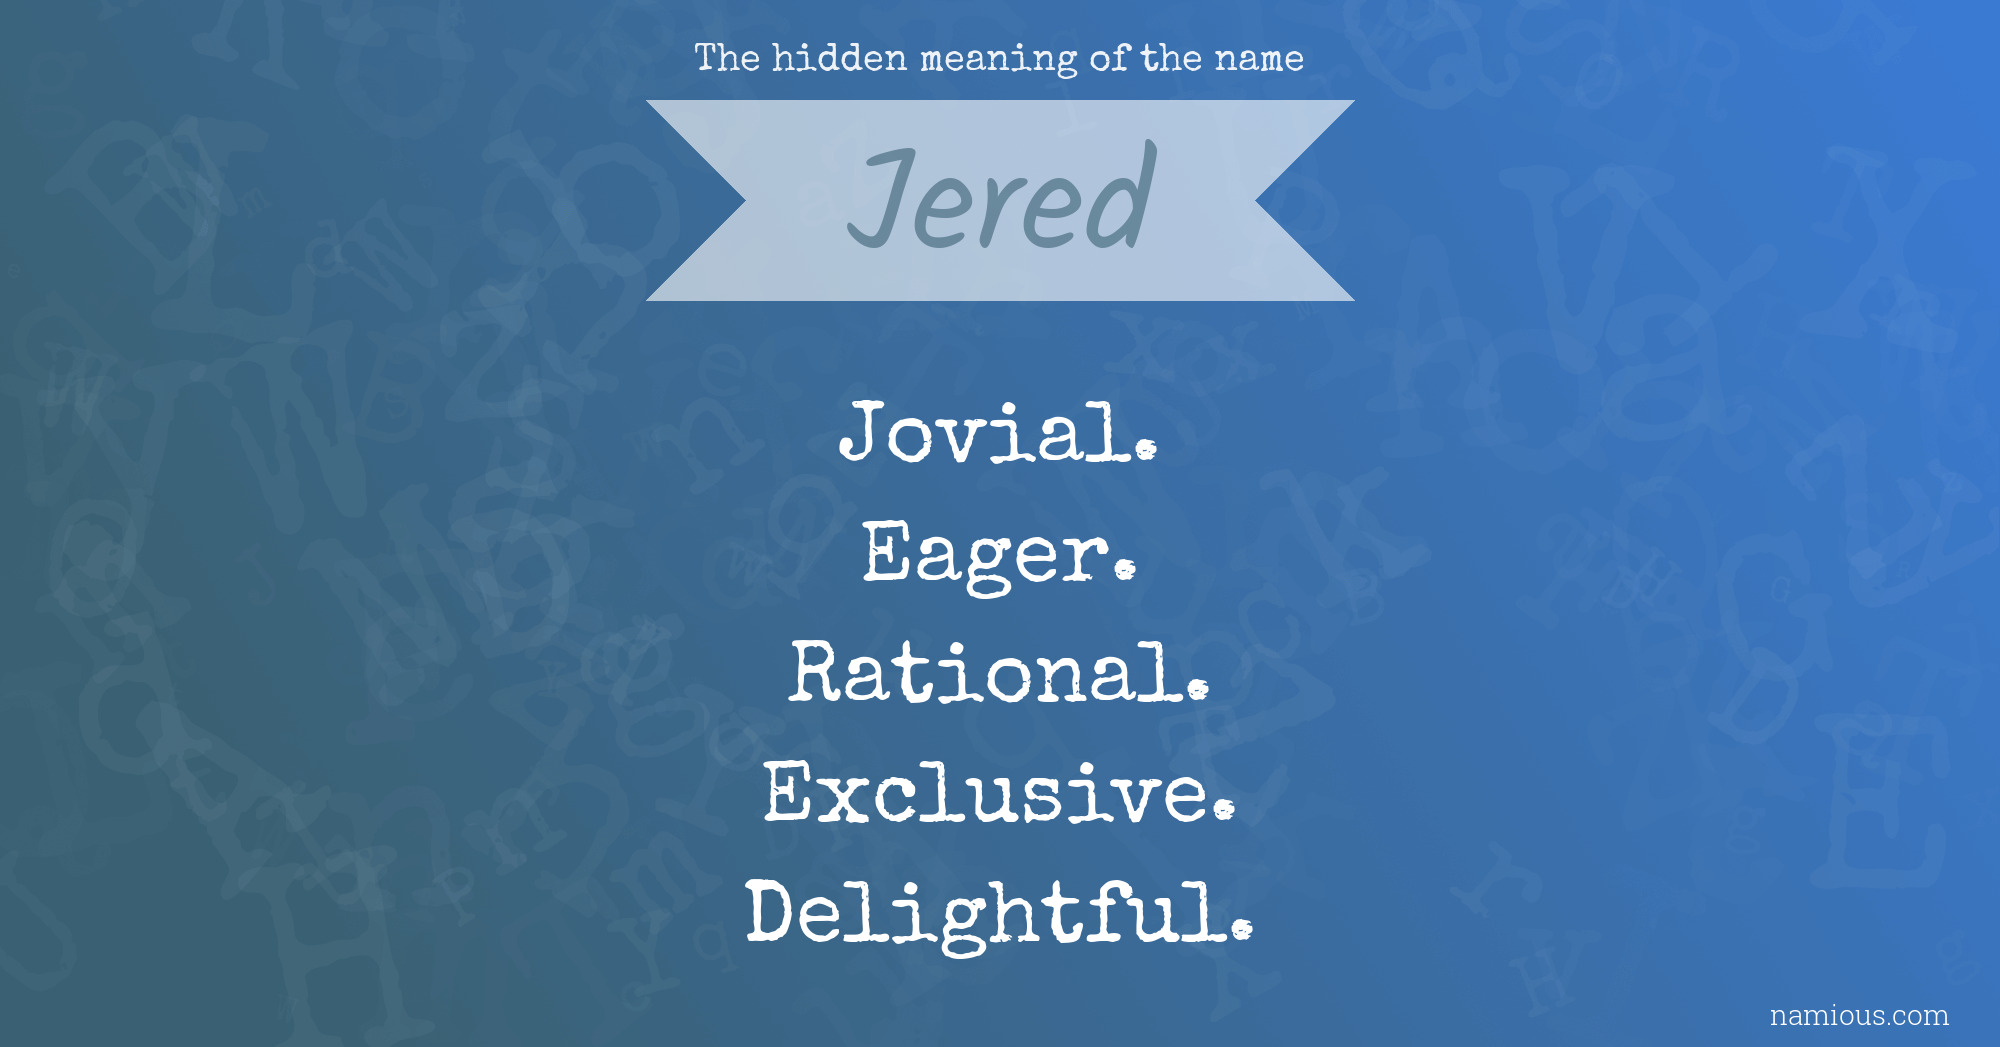 The hidden meaning of the name Jered